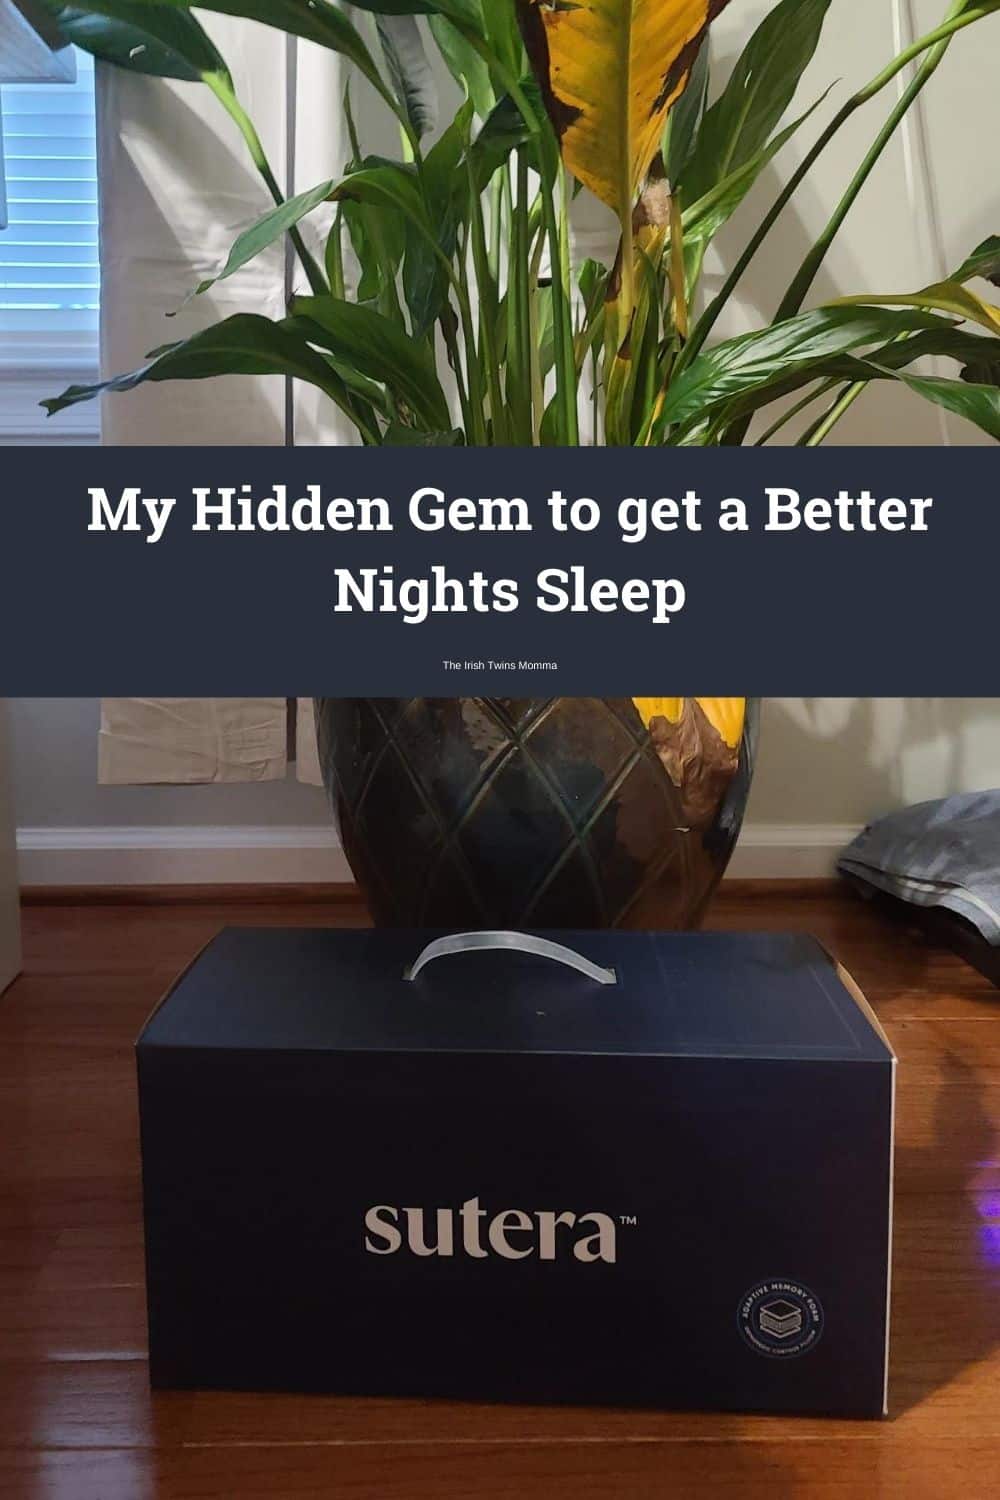 The proper pillow can do wonder's to your sleep including getting you into a deep sleep and waking up refreshed. However, over the year's I have used so many and absolutely love Sutera Sleep Pillow. I am a side and stomach sleeper and this pillow is absolutely epic! via @irishtwinsmom11